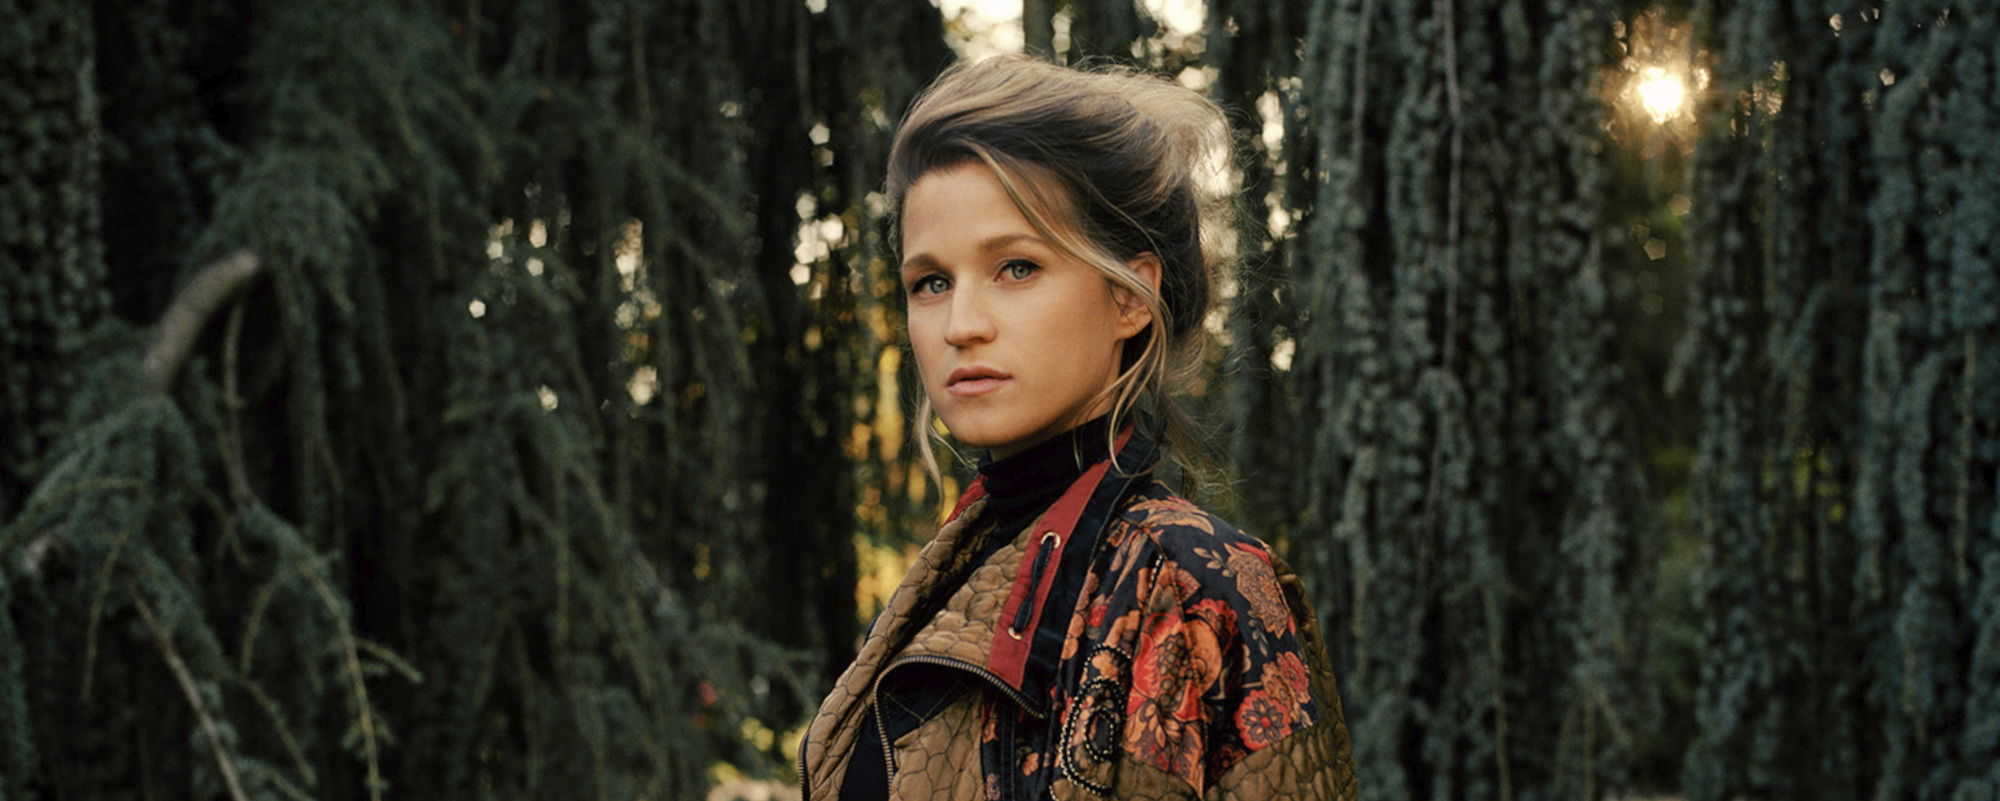 Pop Songstress Selah Sue Gets Real About “Pills” on Latest Single